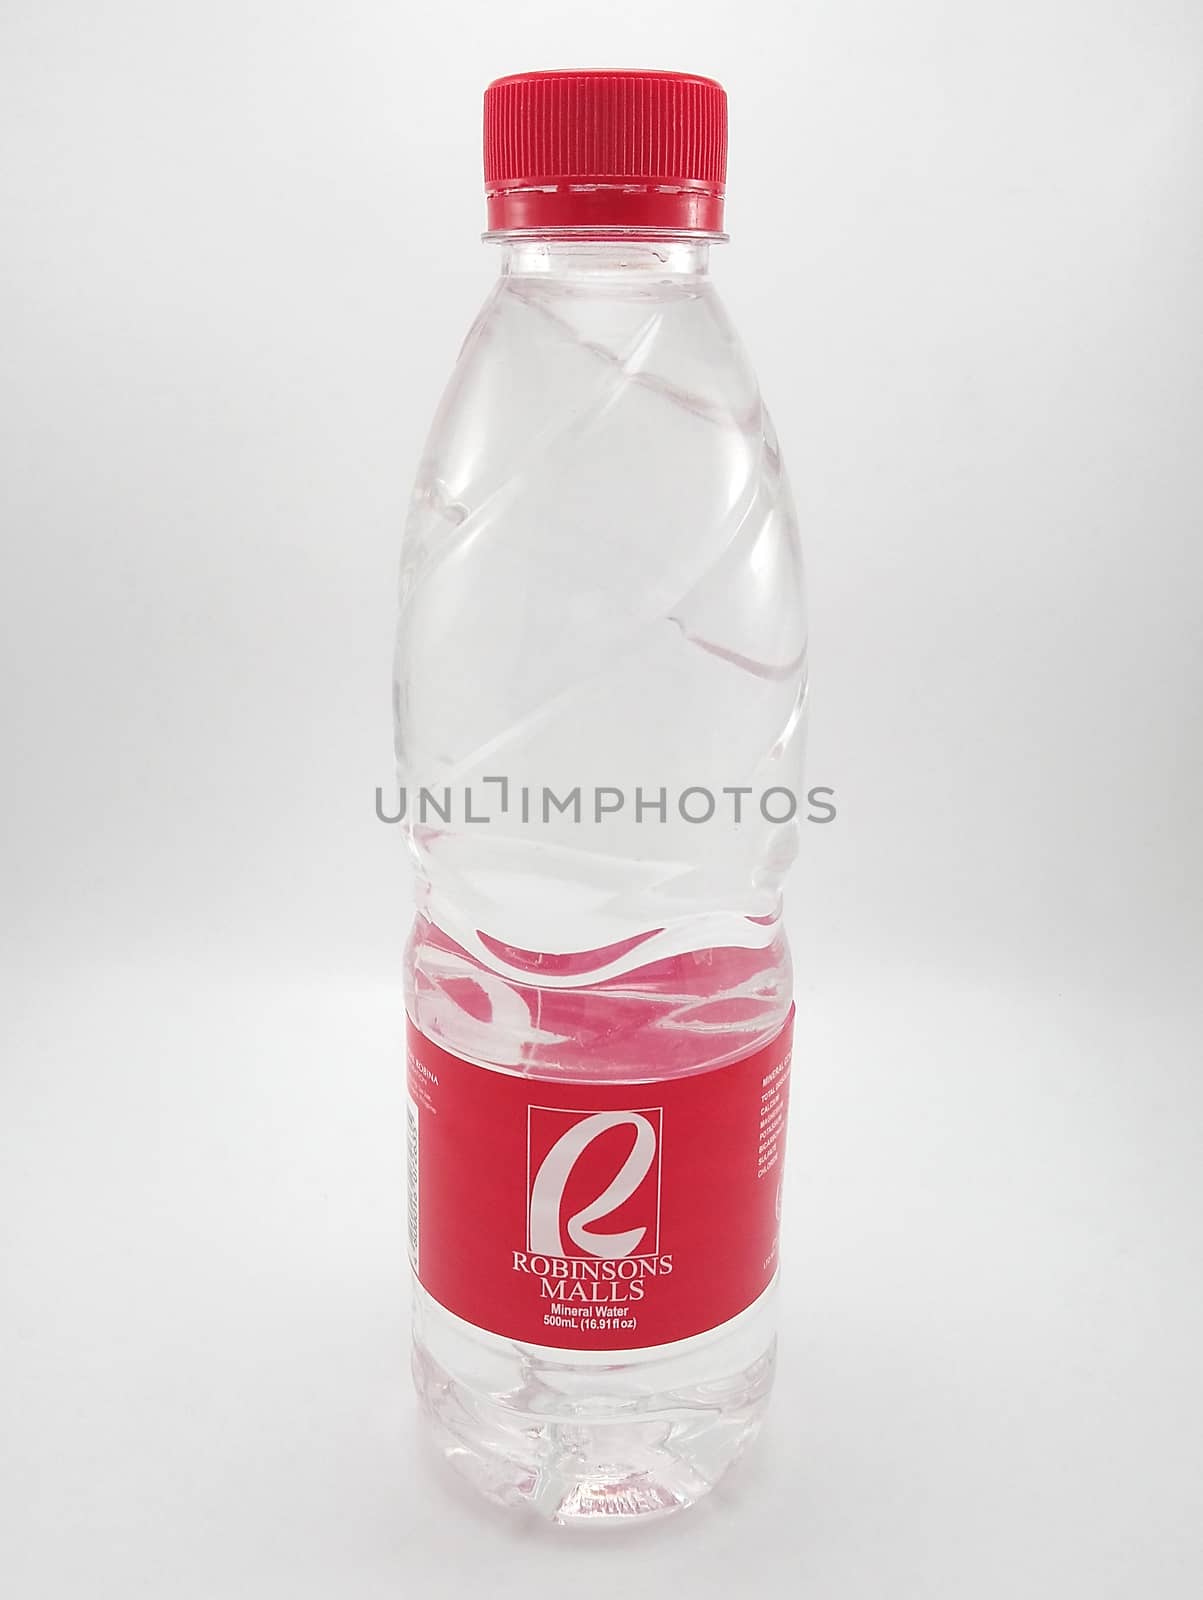 MANILA, PH - SEPT 25 - Robinsons malls mineral water on September 25, 2020 in Manila, Philippines.